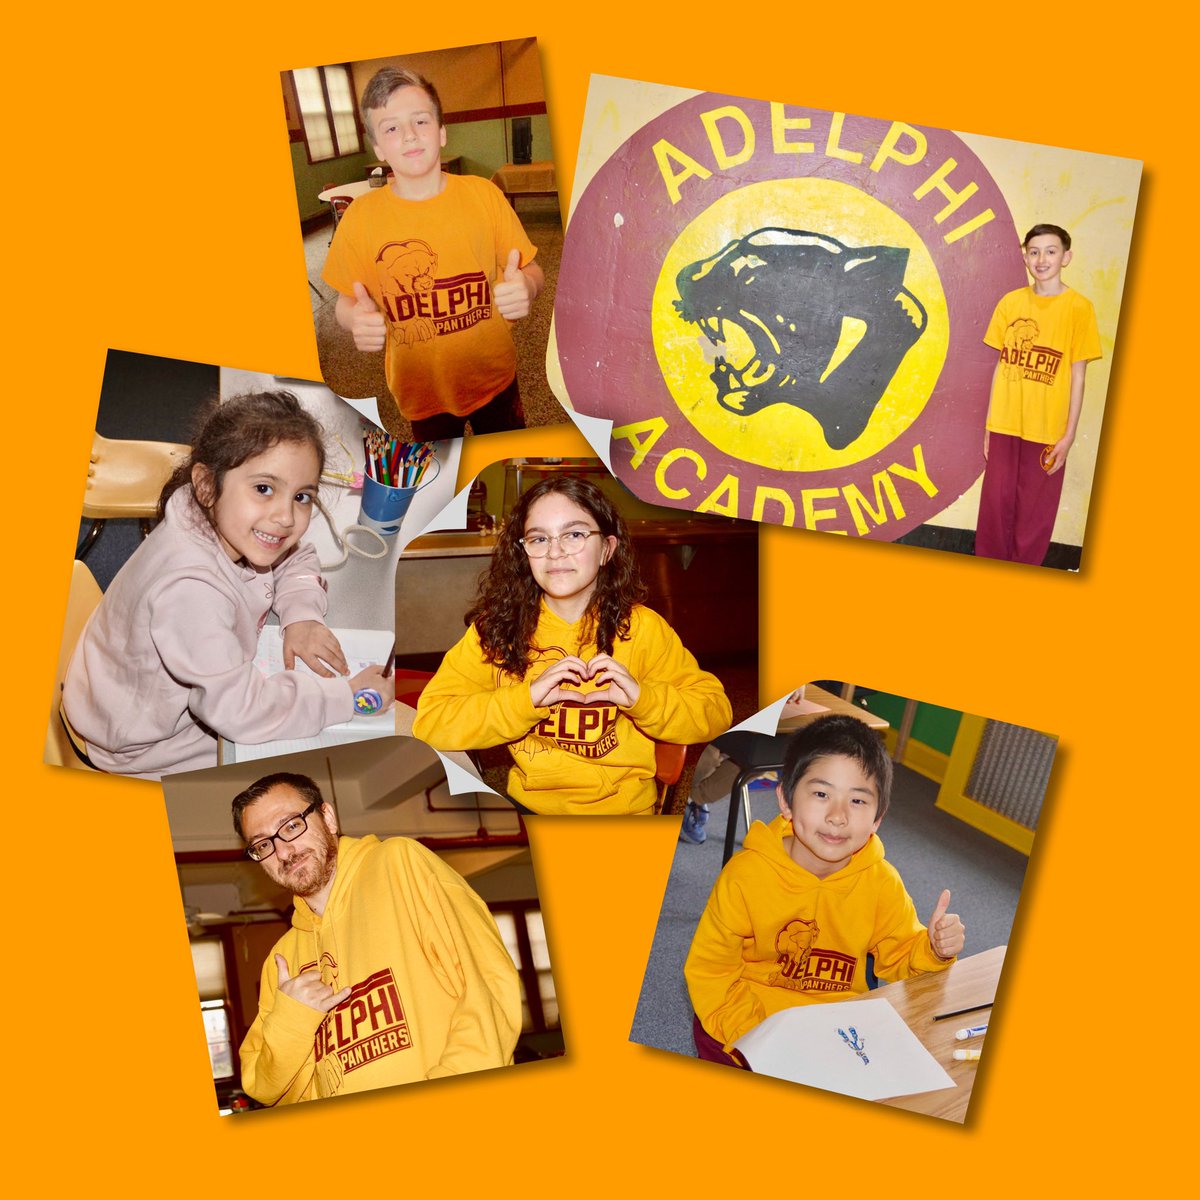 #PantherPride was on full display as Adelphi Academy students, faculty & staff celebrated Brown & Gold Day! Dressed in the official Academy colors, proud Adelphians enjoyed showing school spirit & unity on this special day — the latest in Adelphi’s monthly #SpiritDay events.